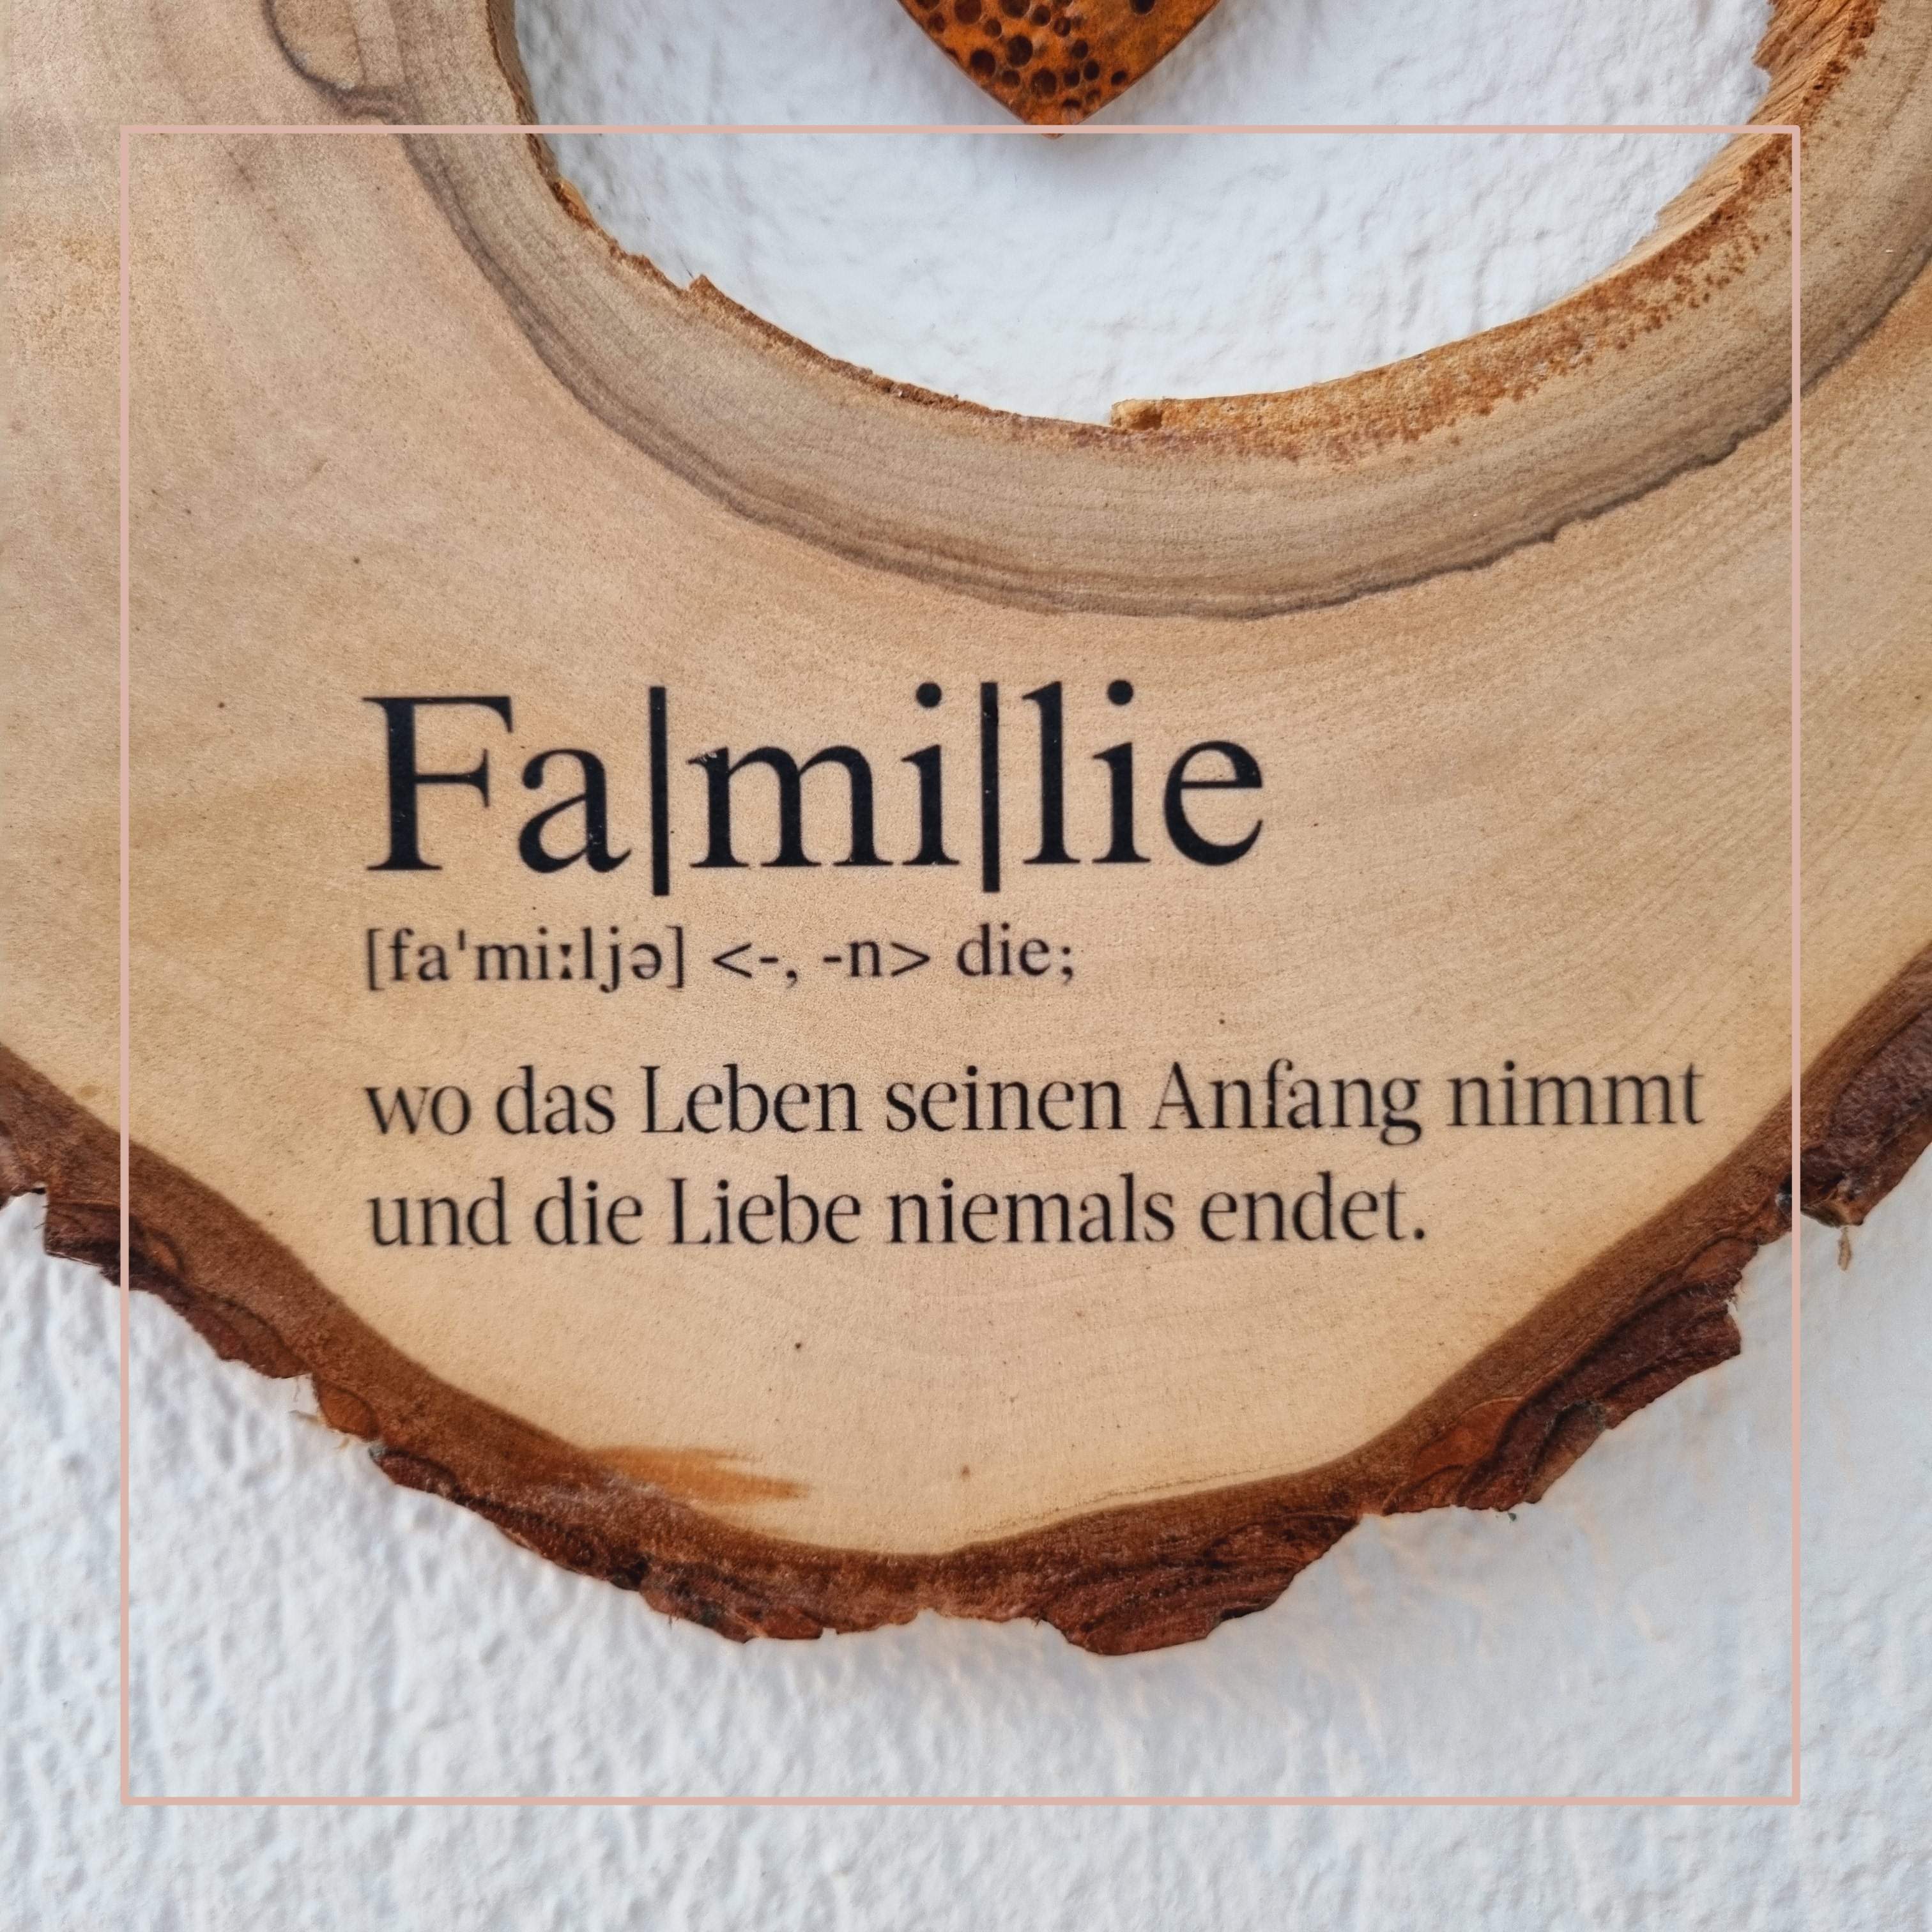 Holzscheibe "Familie"